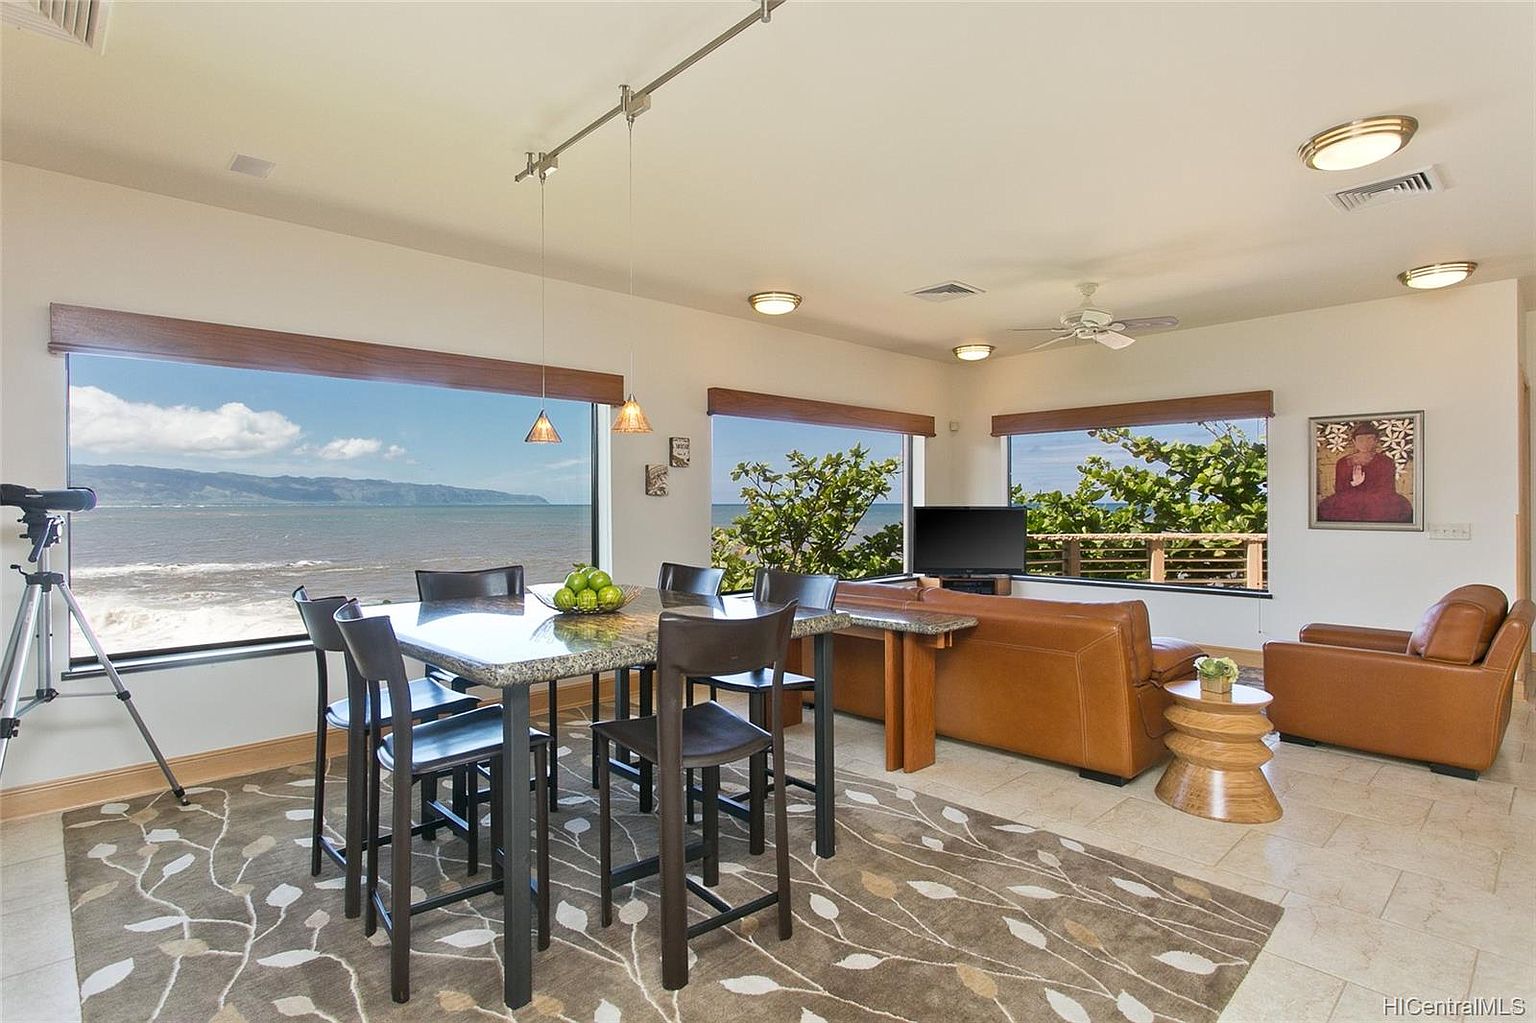 59-779 KAMEHAMEHA HWY, HALEIWA, HI 96612 - $5,100,000 home for sale, house images, photos and pics gallery